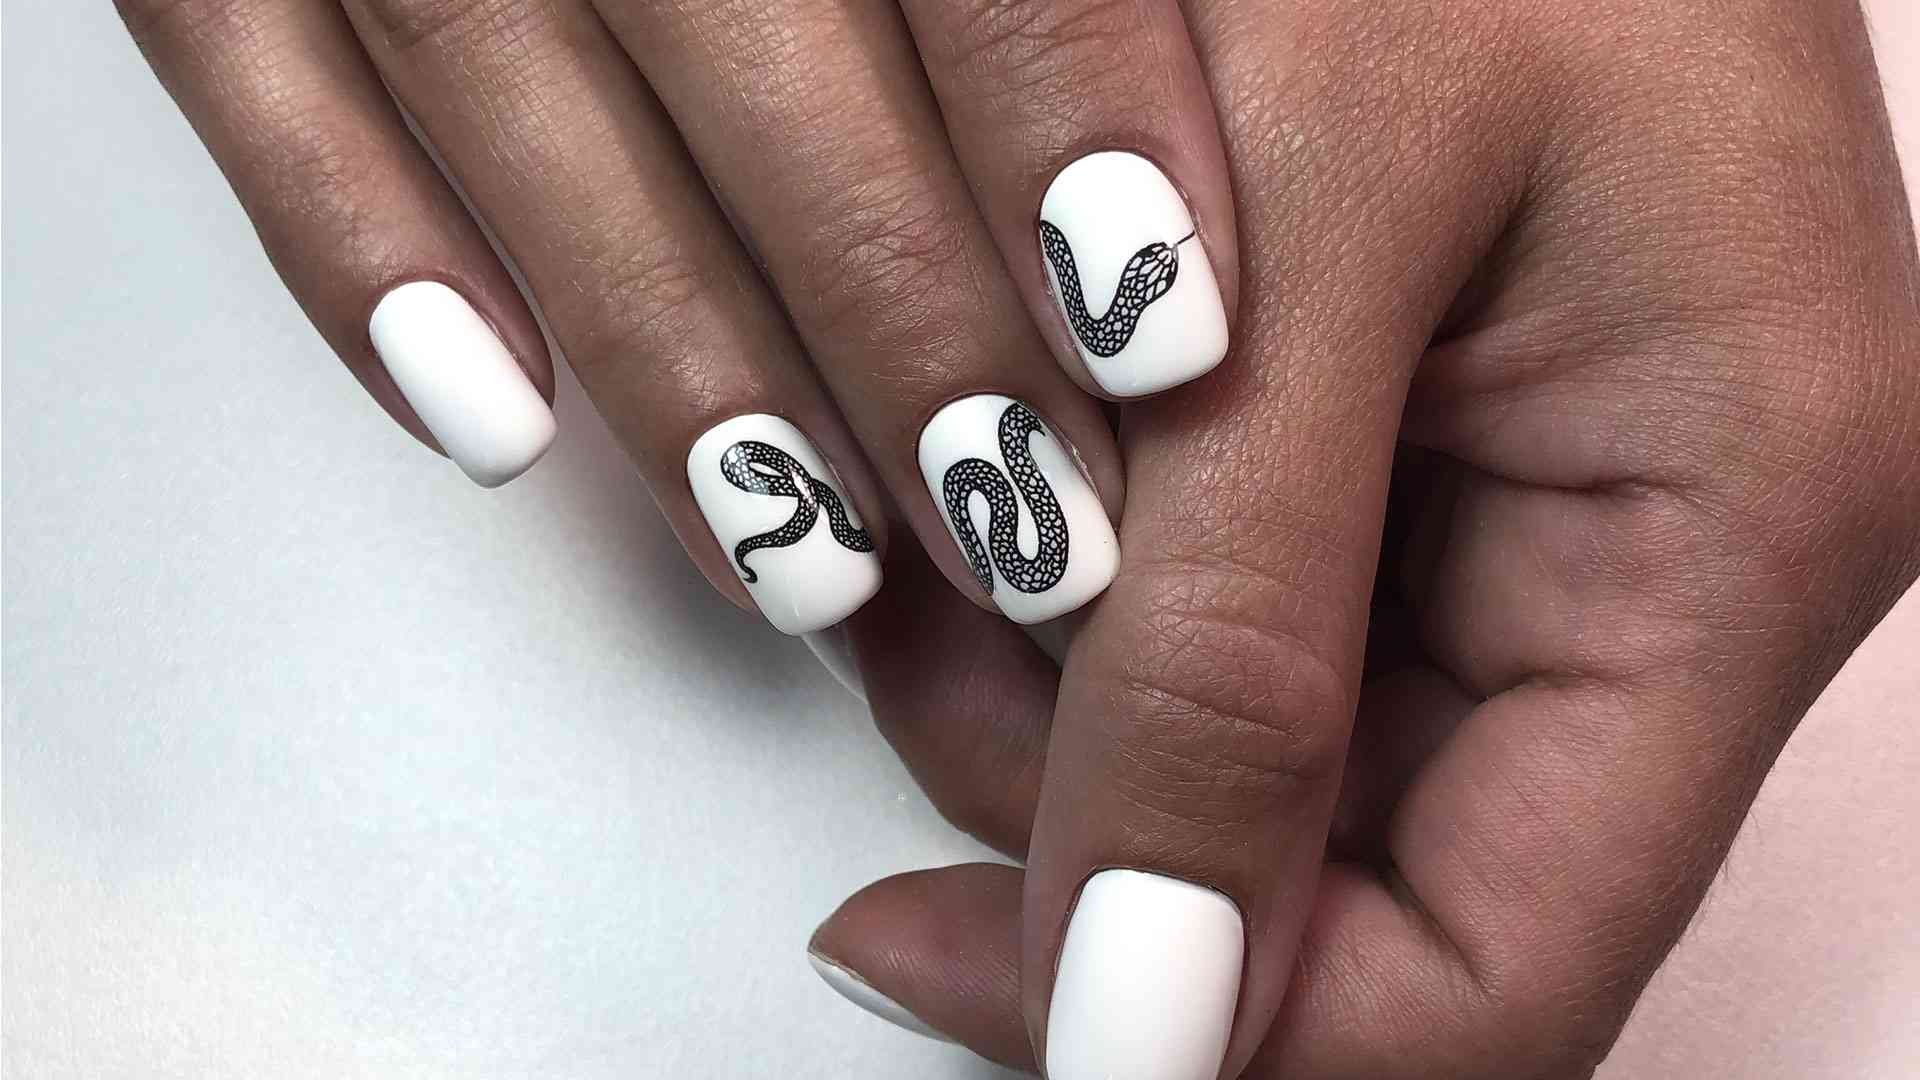 7. Black and White Snake Nails - wide 5